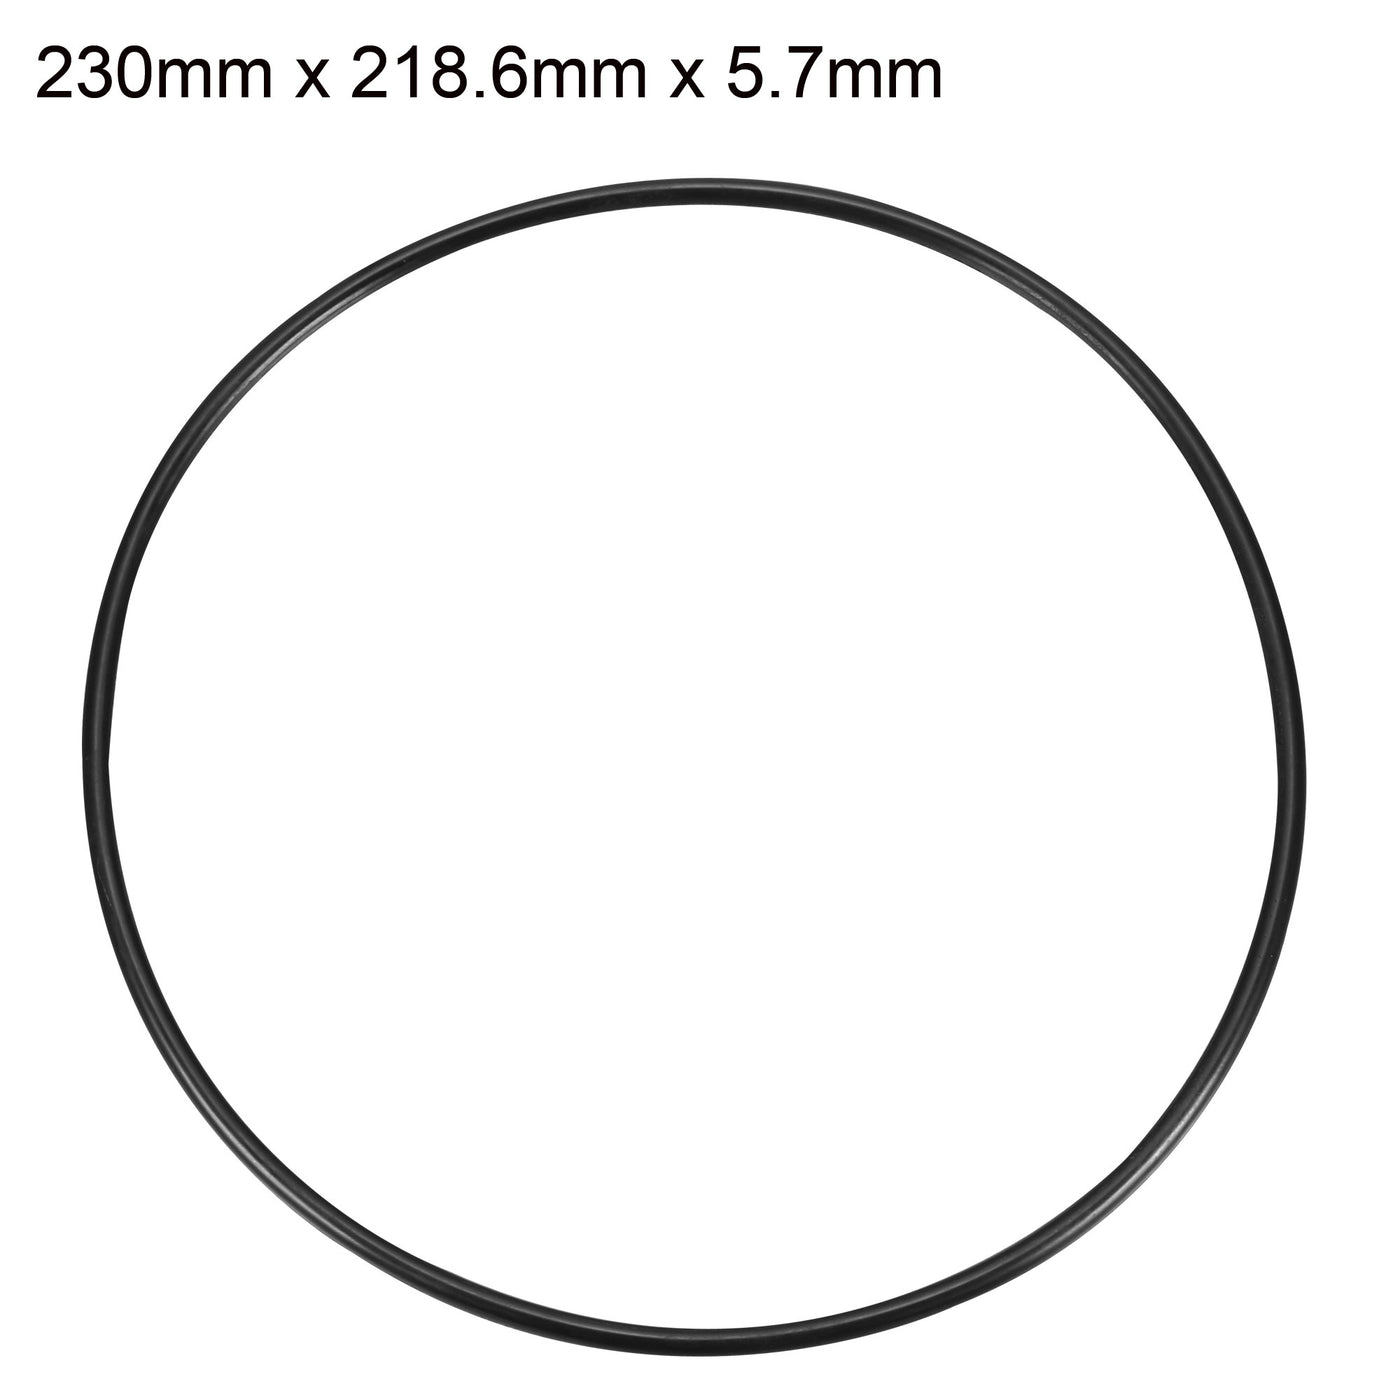 uxcell Uxcell Nitrile Rubber O-Rings, Metric Buna-N Sealing Gasket, Pack of 1